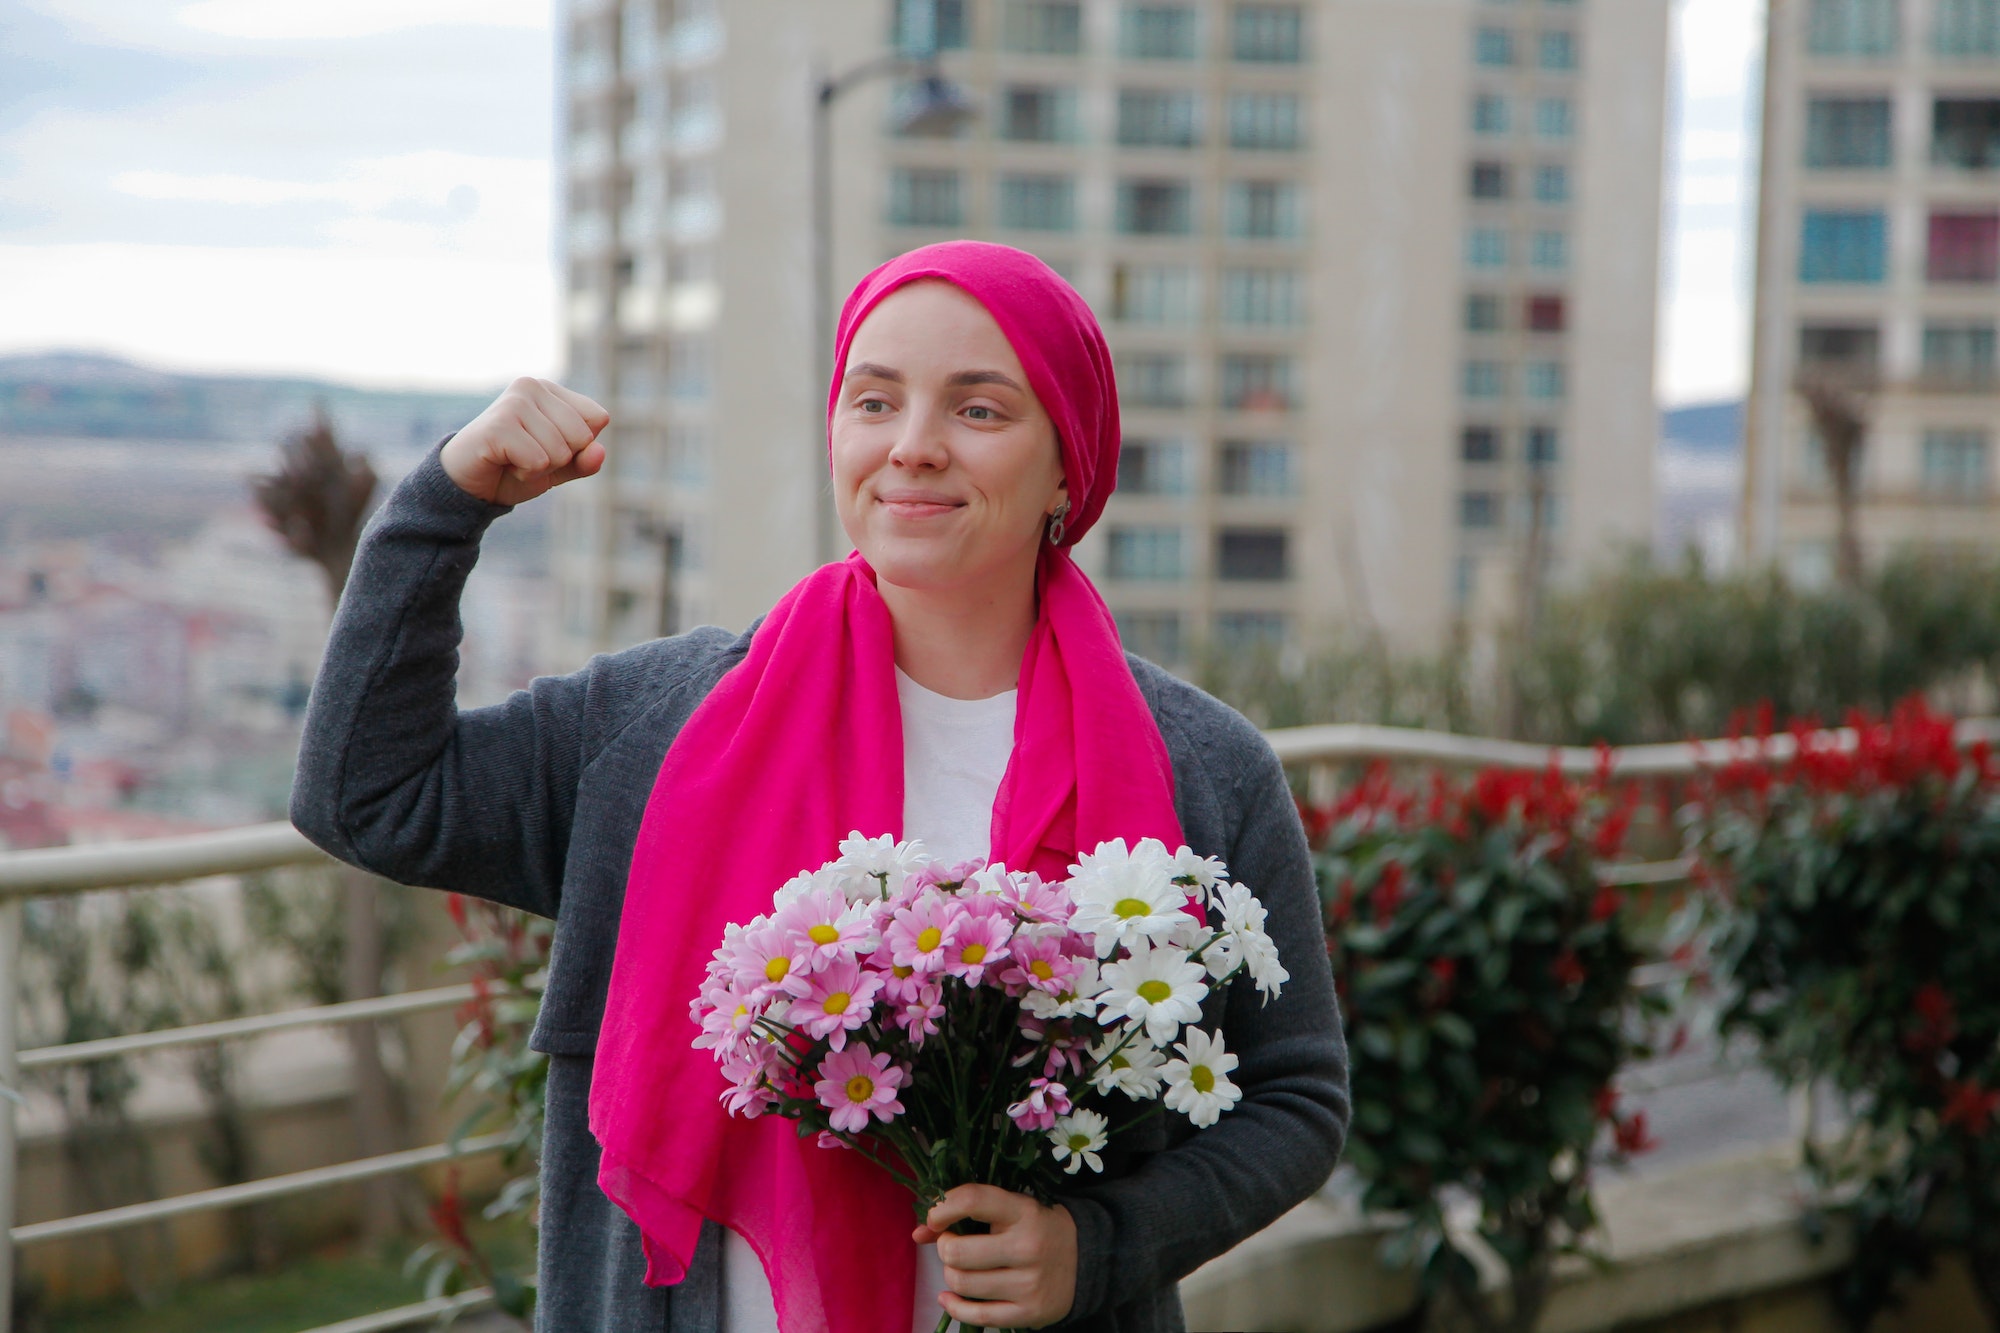 Cancer patient women with flowers in hand